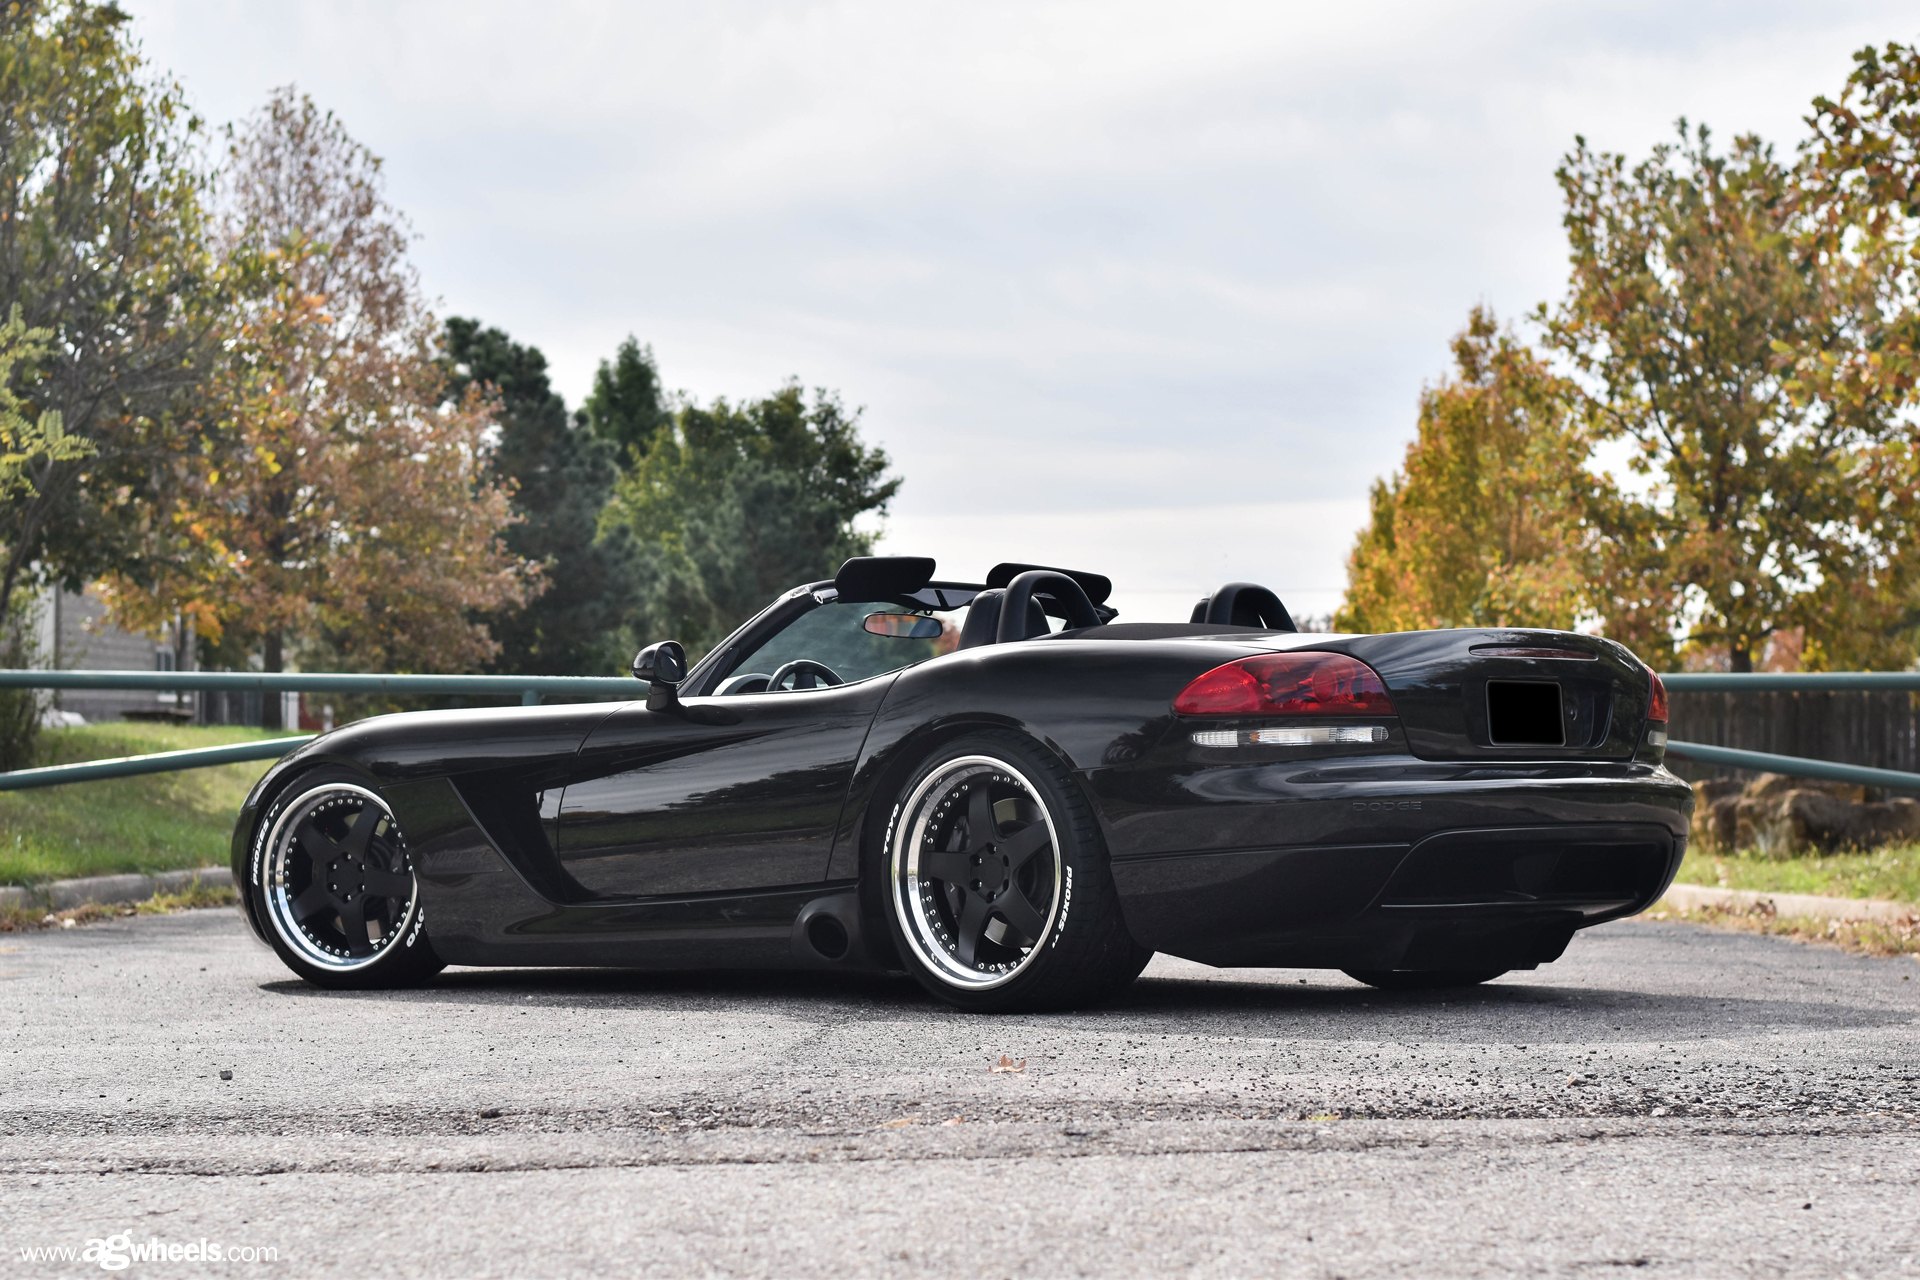 Black Convertible Dodge Viper with Aftermarket Side Skirts - Photo by Avant Garde Wheels